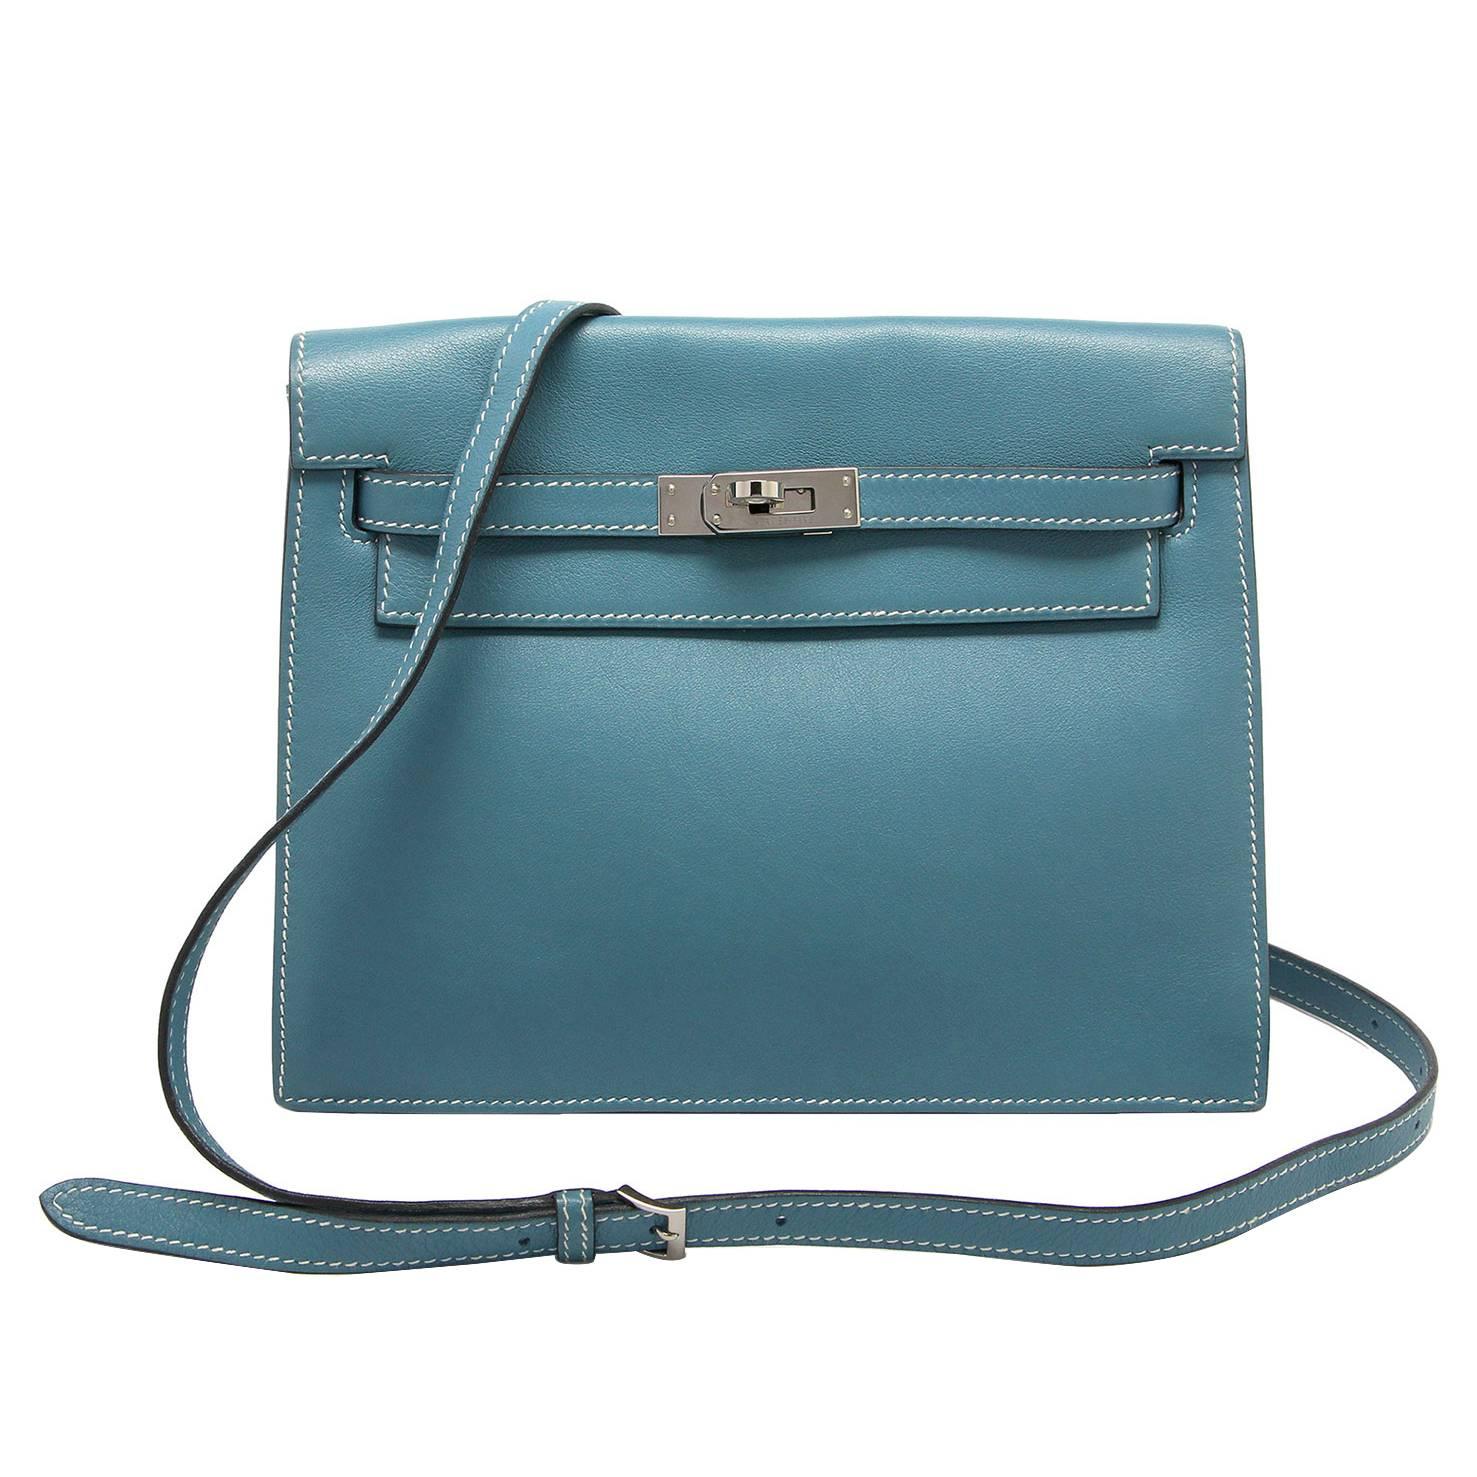 Hermes Kelly Danse 
Blue Jean
Swift 
Palladium Hardware
Stamp: M Square 2009
Comes with Hermes cloth bag & strap.

Hermes do not make this style of bag anymore.  It works as a great shoulder bag or clutch.